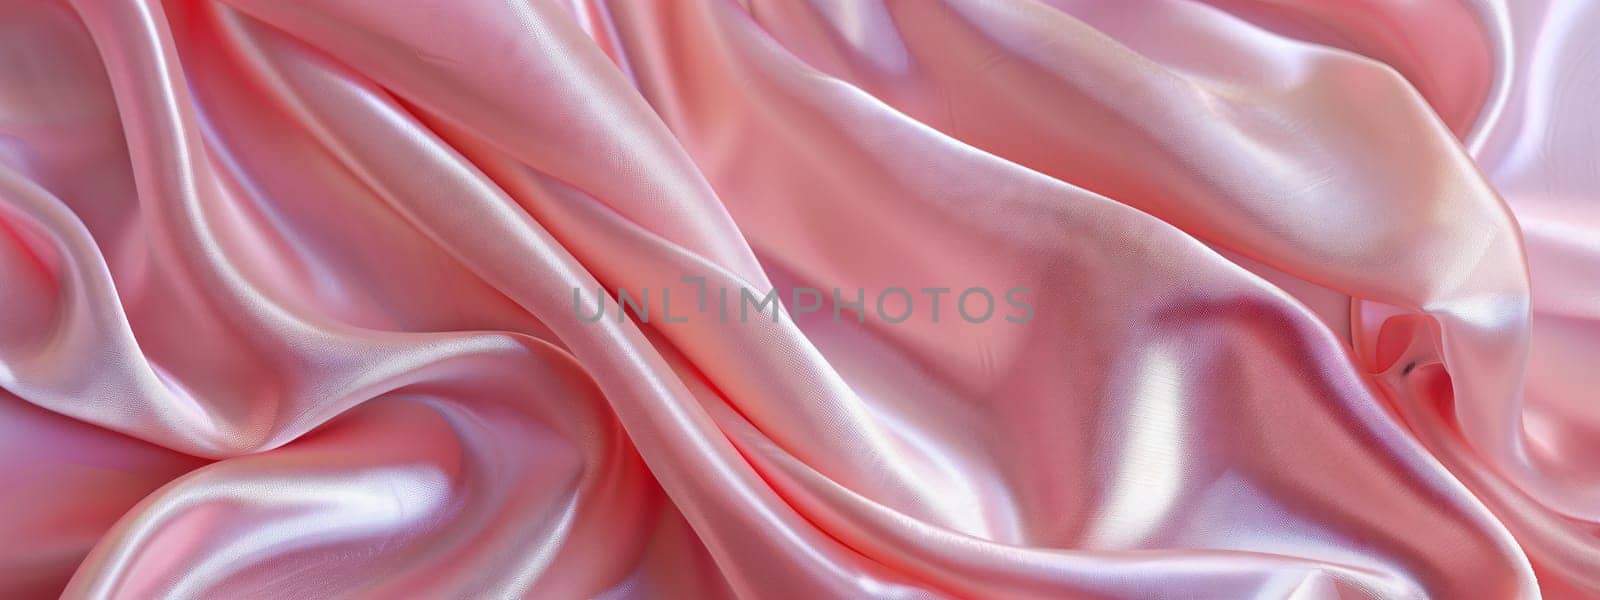 Closeup of magenta satin fabric with intricate petal pattern by richwolf